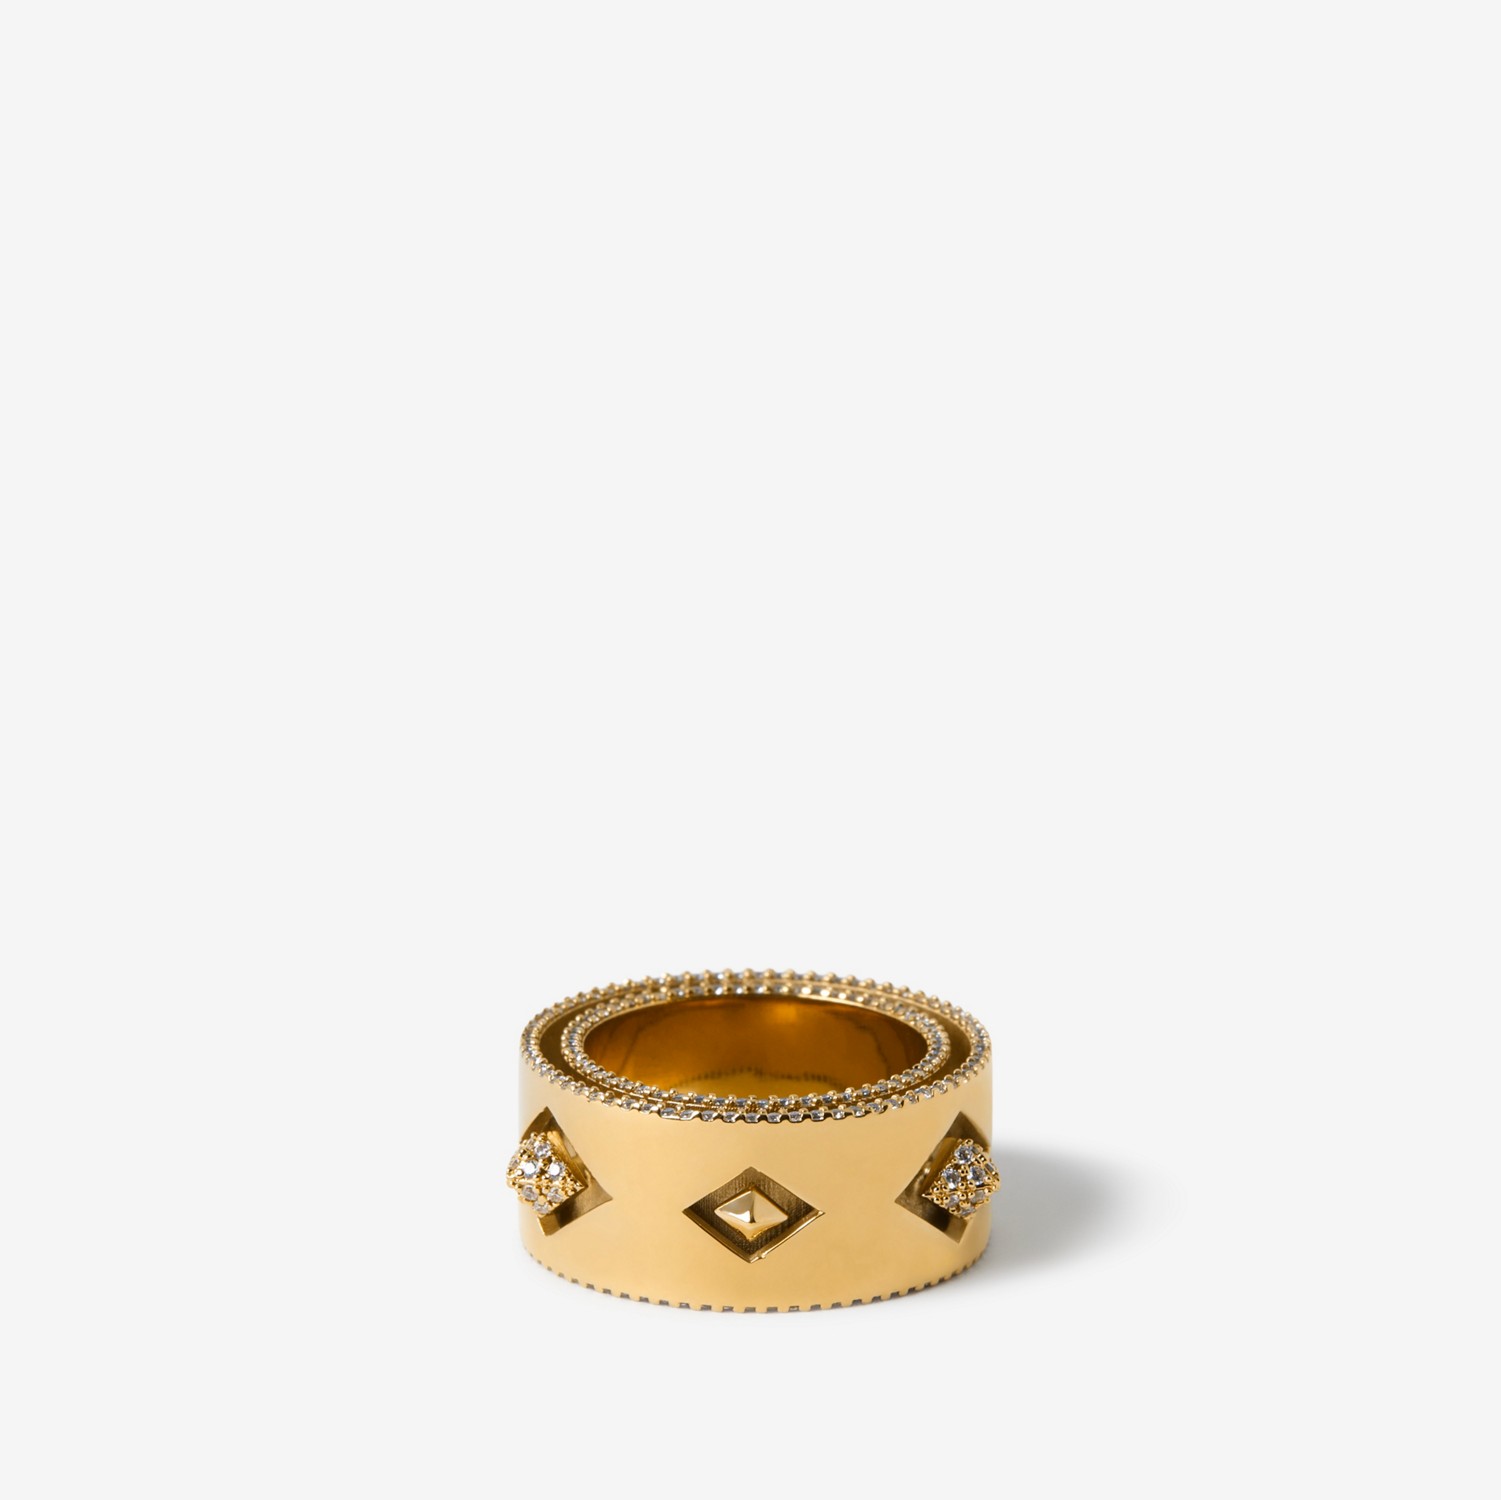 Hollow Layer Ring